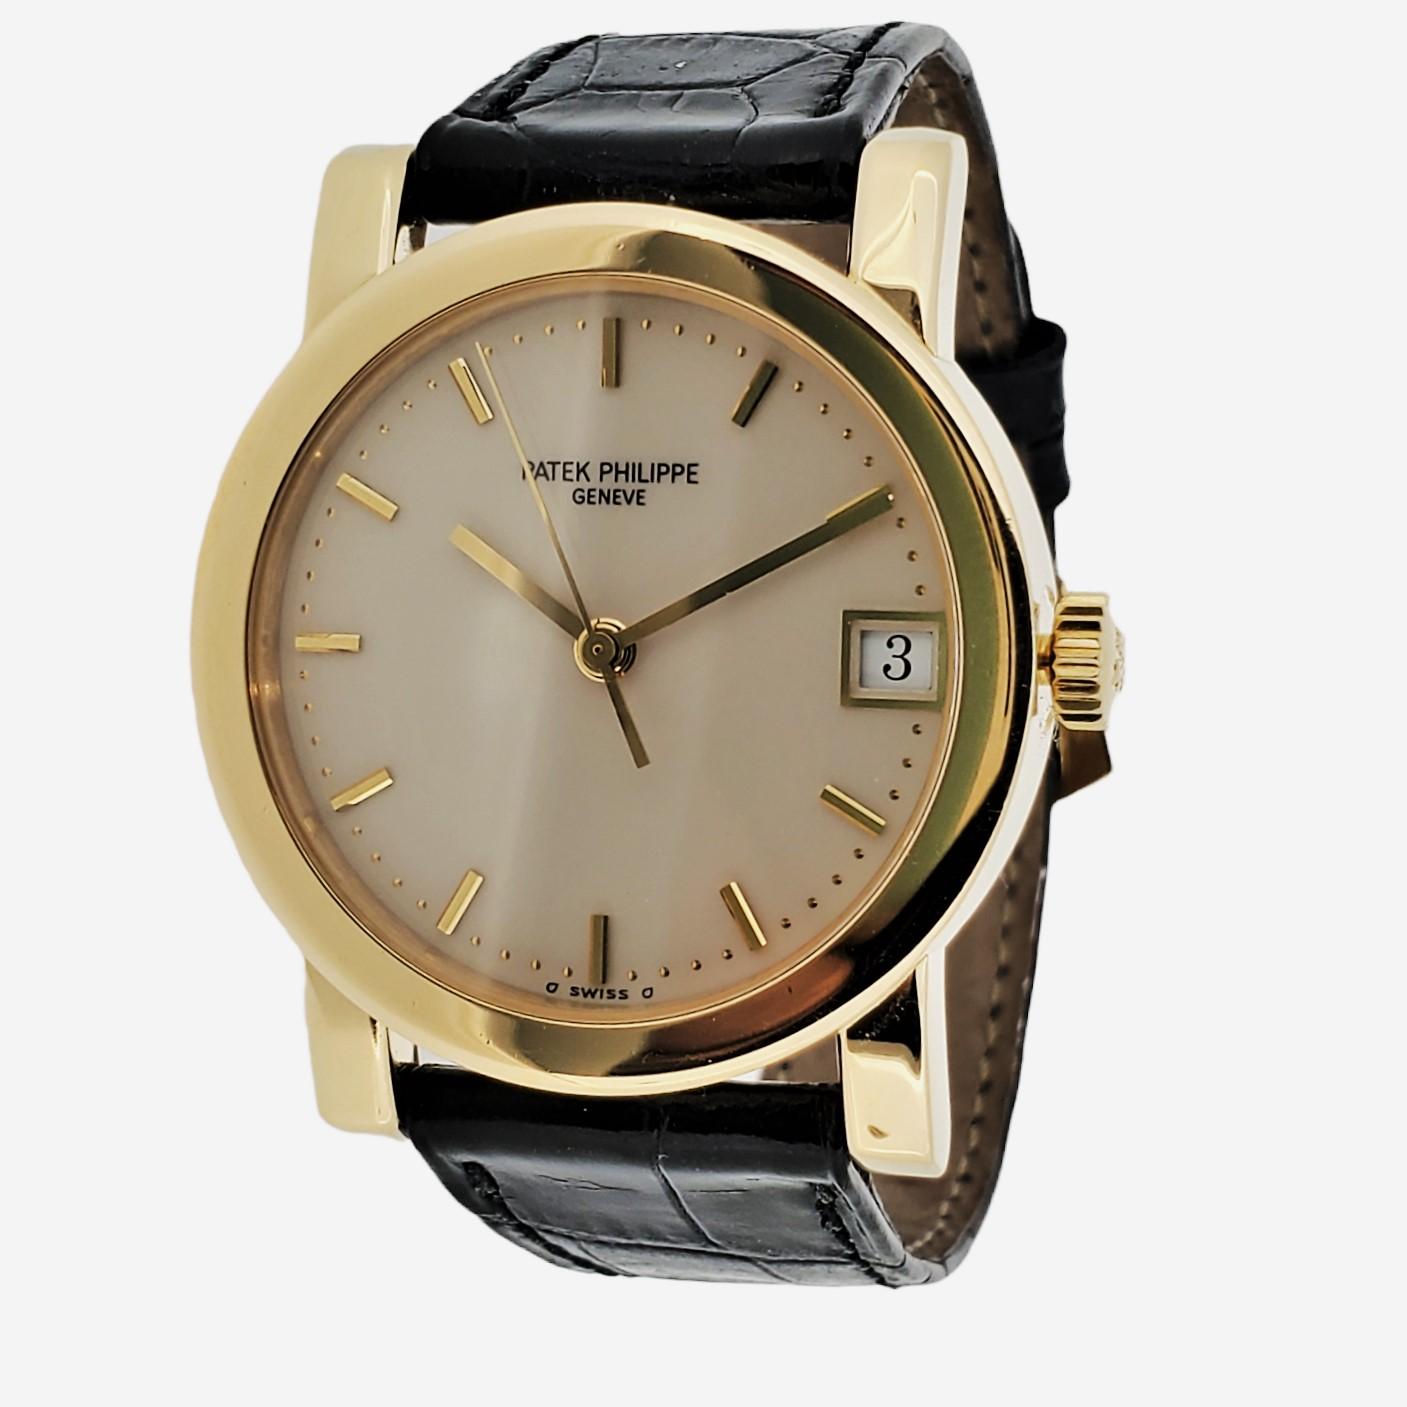 Introduction:
Patek Philippe 5012J Automatic Calatrava Massive Bold Case 34mm.  Made in 18 Yellow gold case, with a 315 SC caliber 29-jewel  Automatic movement # 1912537,  case # 2938031.  The watch was made in 1996 and is accompanied with its Patek